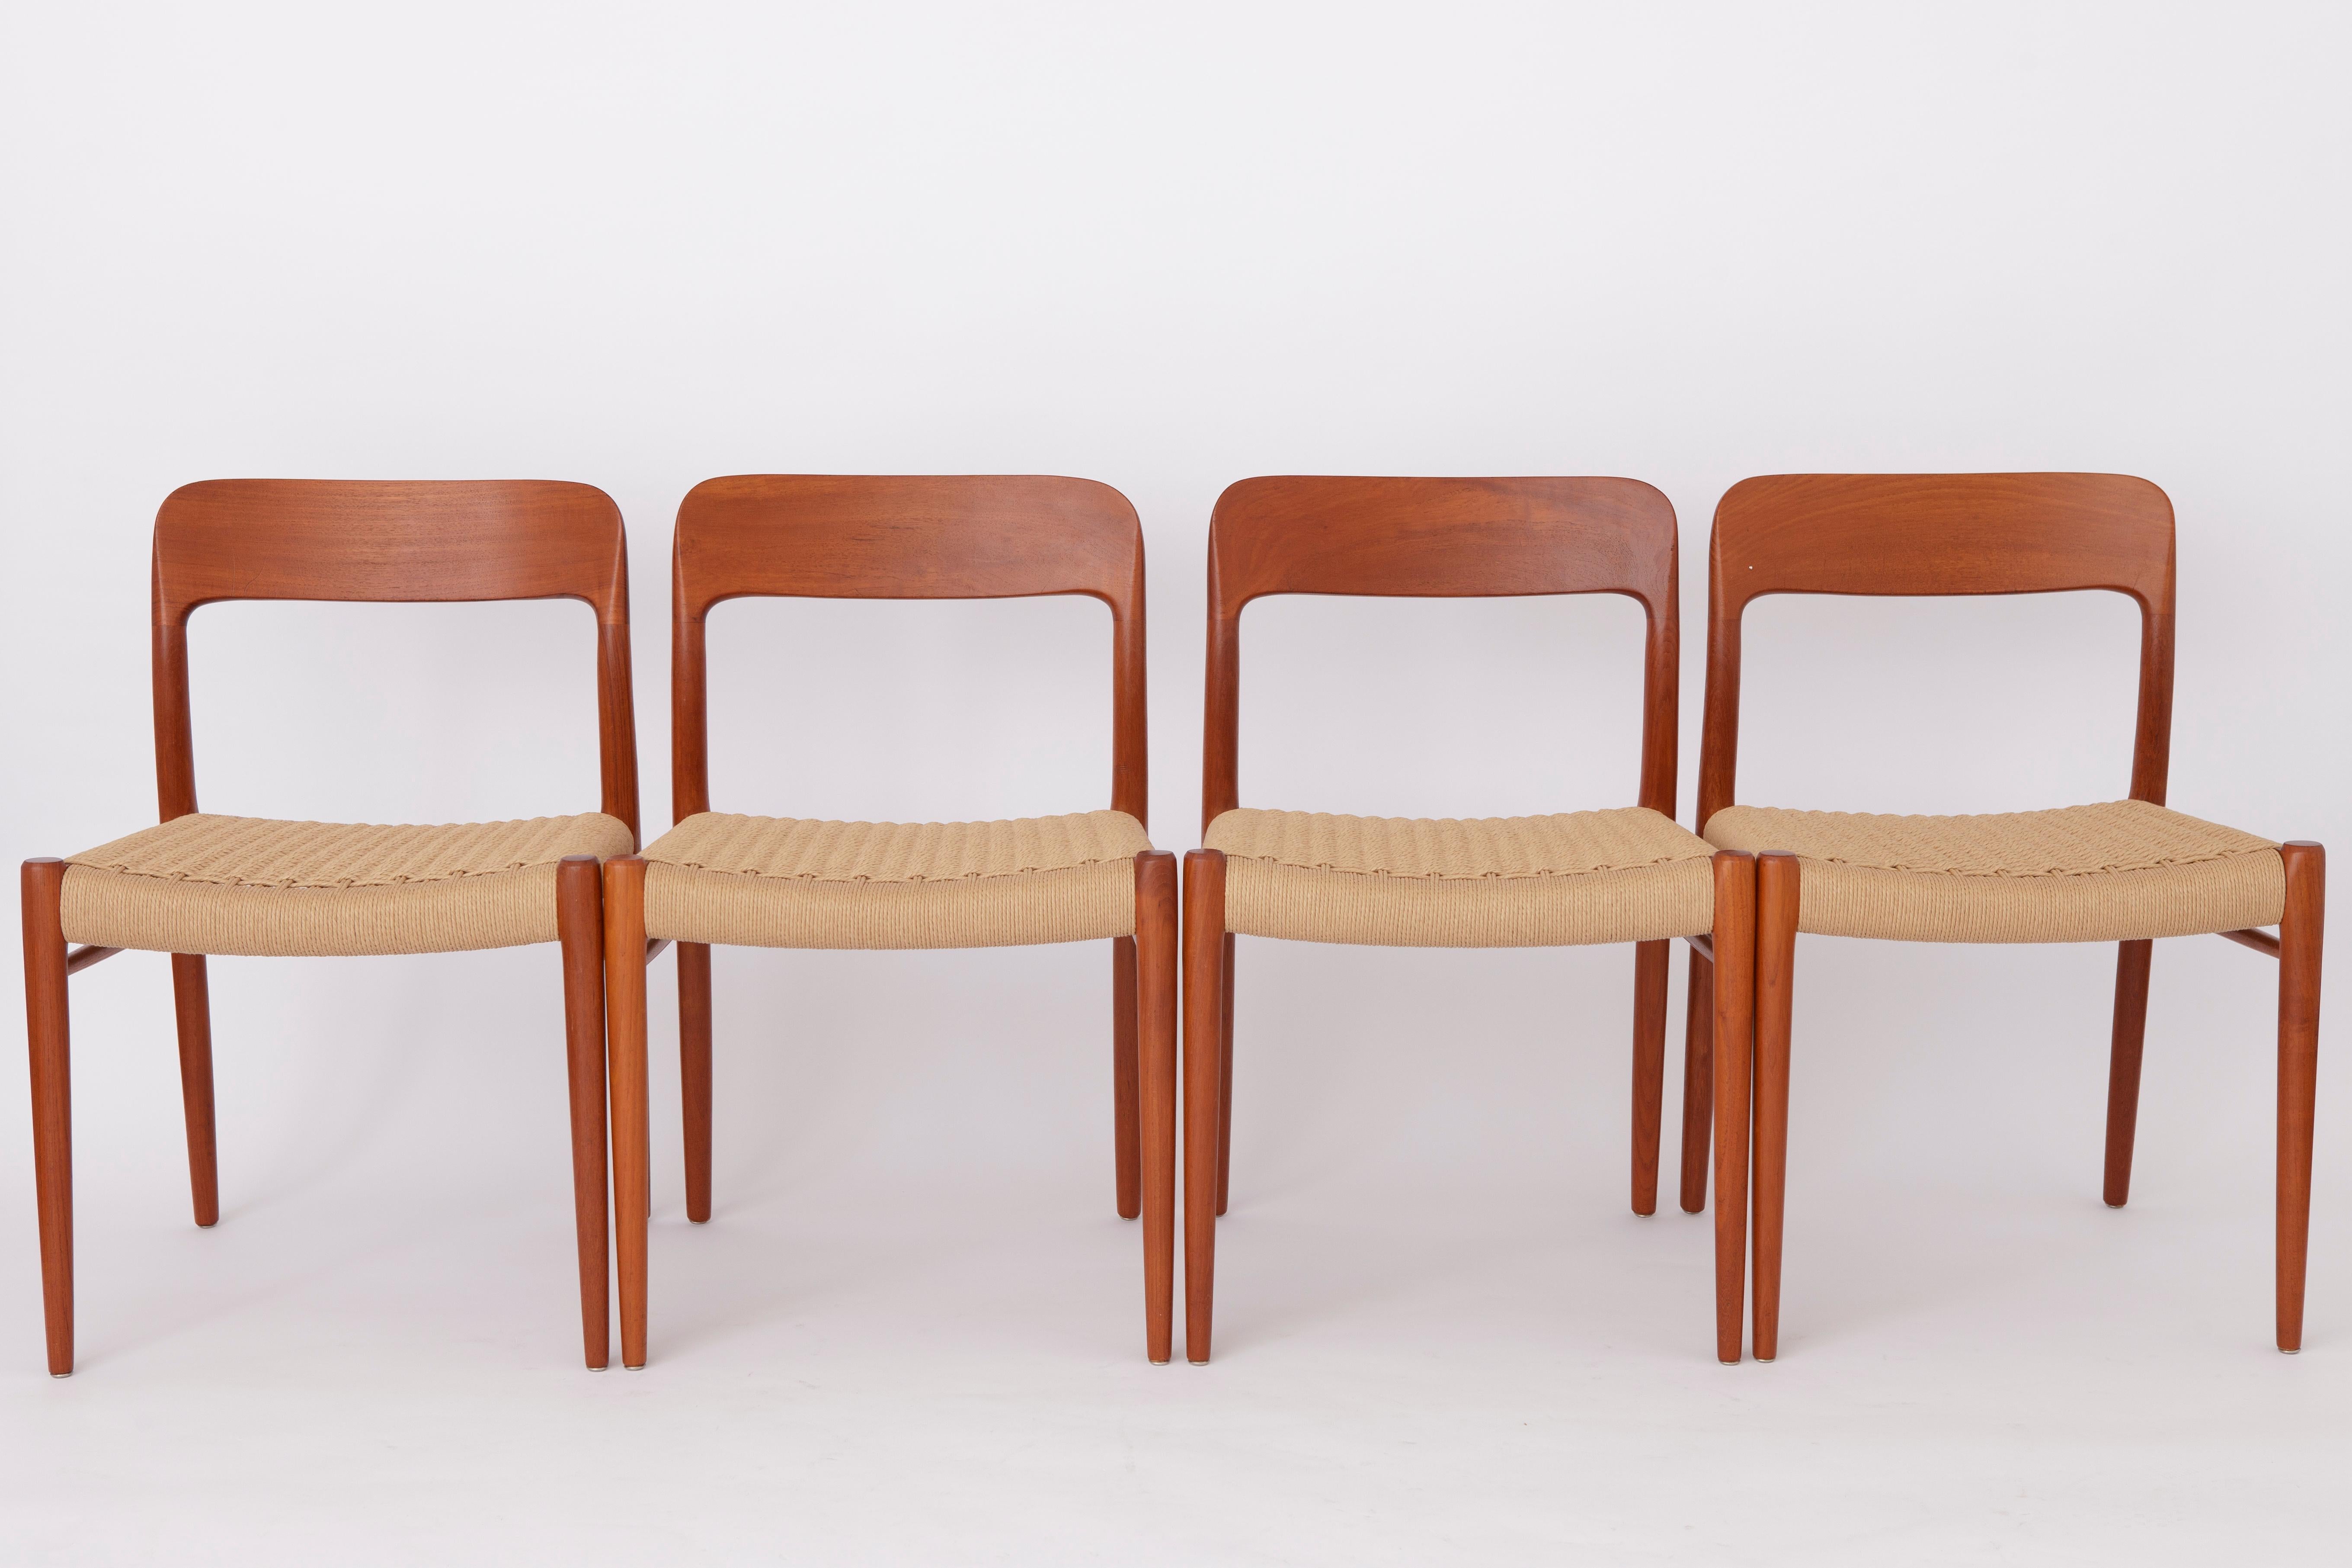 Set of 4 chairs of Niels Otto Moller, model 75. Designed in 1954. 

The most wanted chair model within the Moller range. :-)
Unique, classic, danish design from the 1950s. 
Beside the model 71, one of the absolute earliest chair models of the